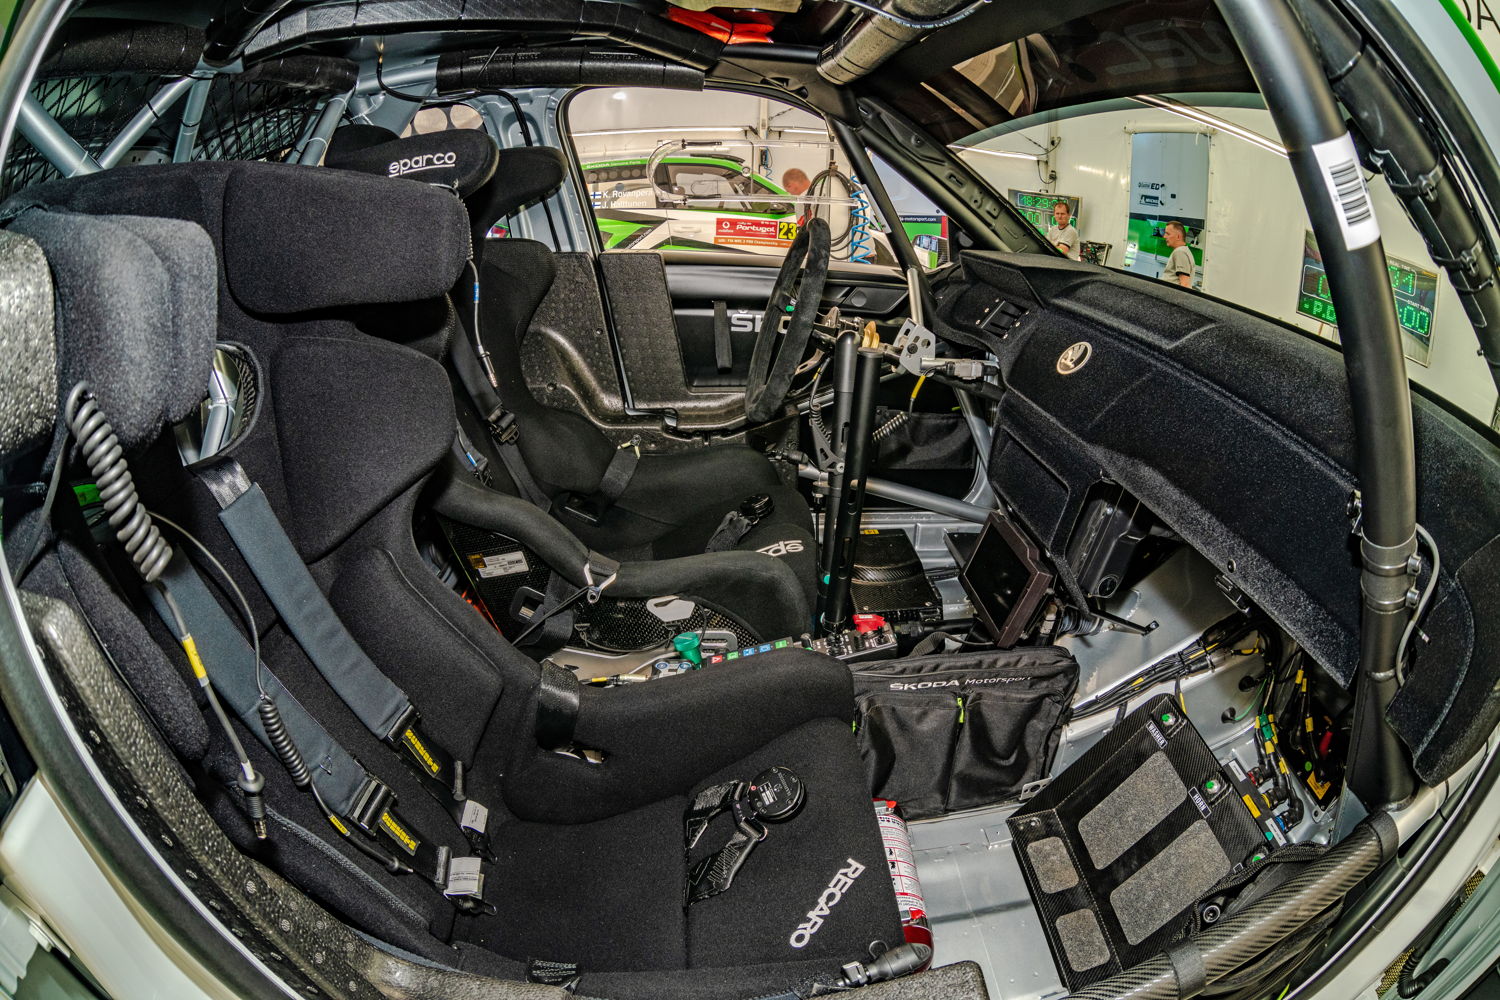 Safe and functional: The cockpit of the ŠKODA FABIA
Rally2 evo with its roll cage and racing seats with head
wrap around